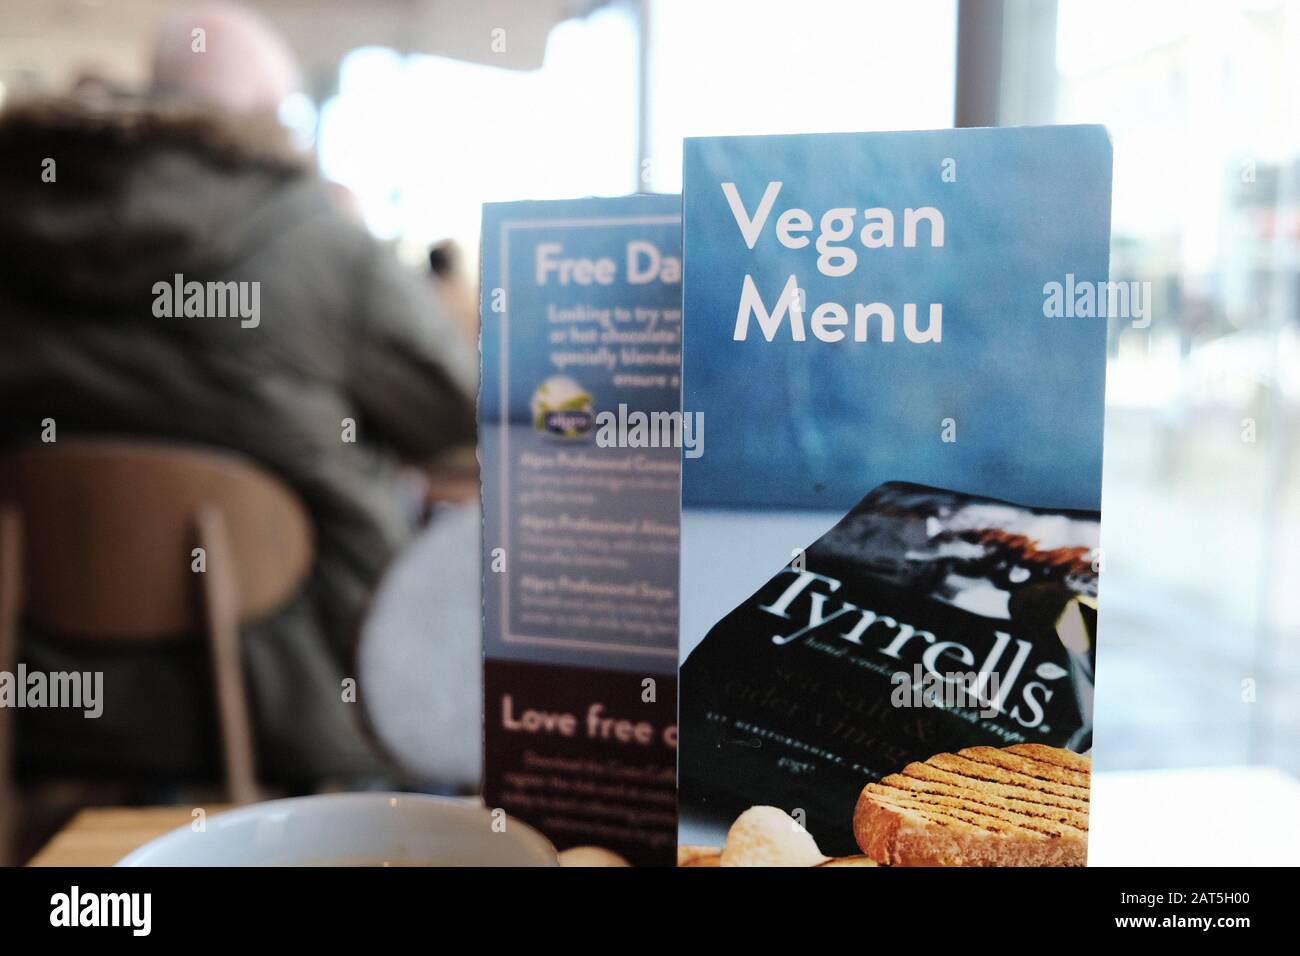 A vegan menu card on a table in a Costa coffee shop on a High St. The chain offers a range of dairy substitutes, snacks and soups to cater for Vegans Stock Photo